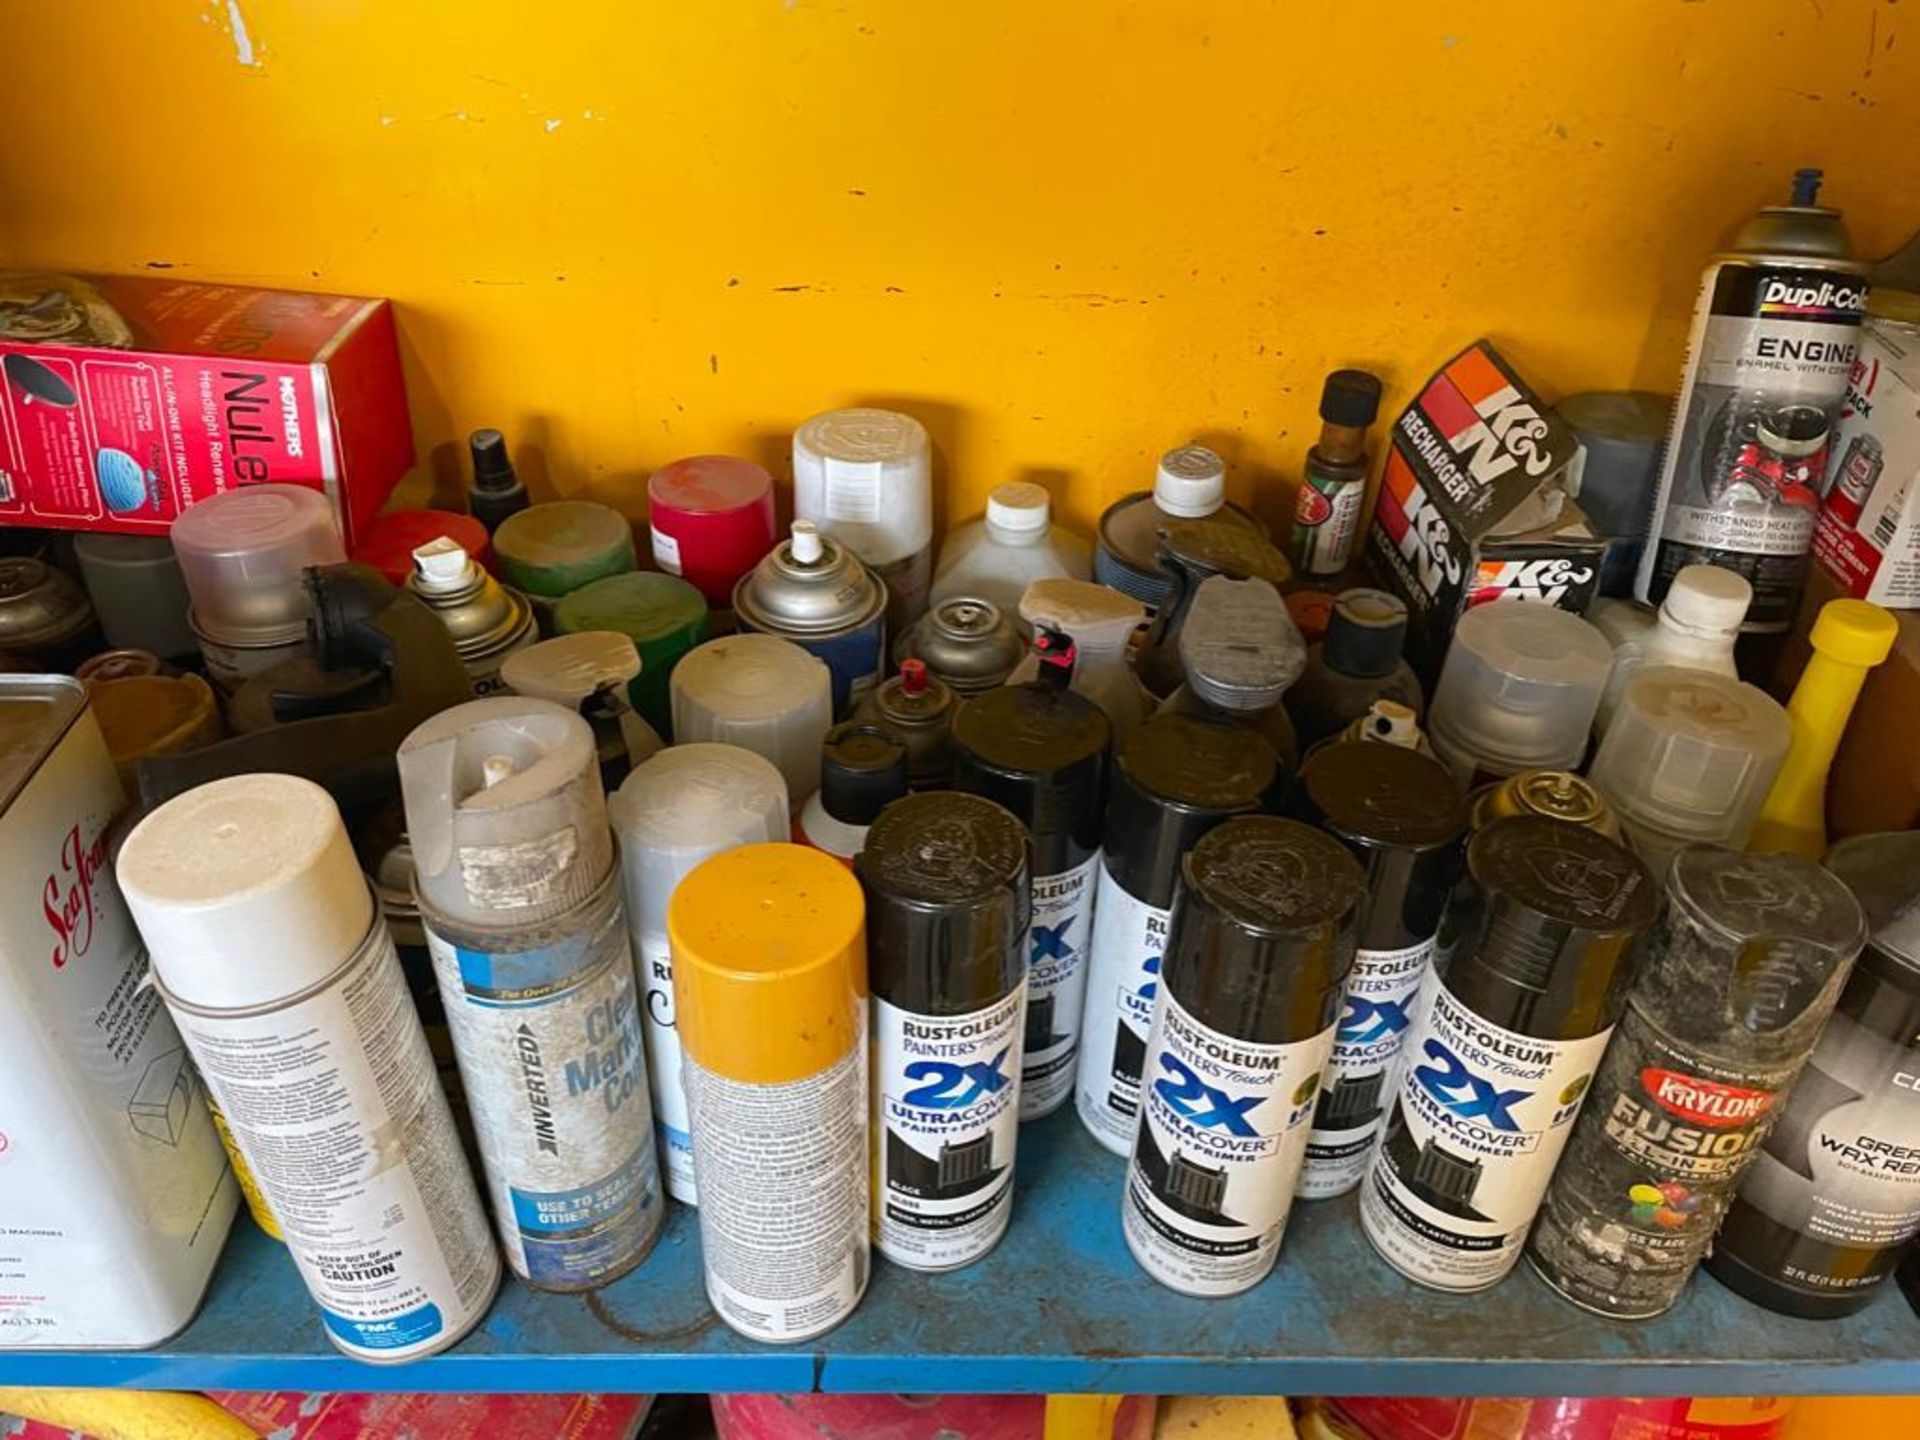 Miscellaneous Paint Supplies, Oils, Lubricants, Etc. Located in Hazelwood, MO - Image 6 of 7